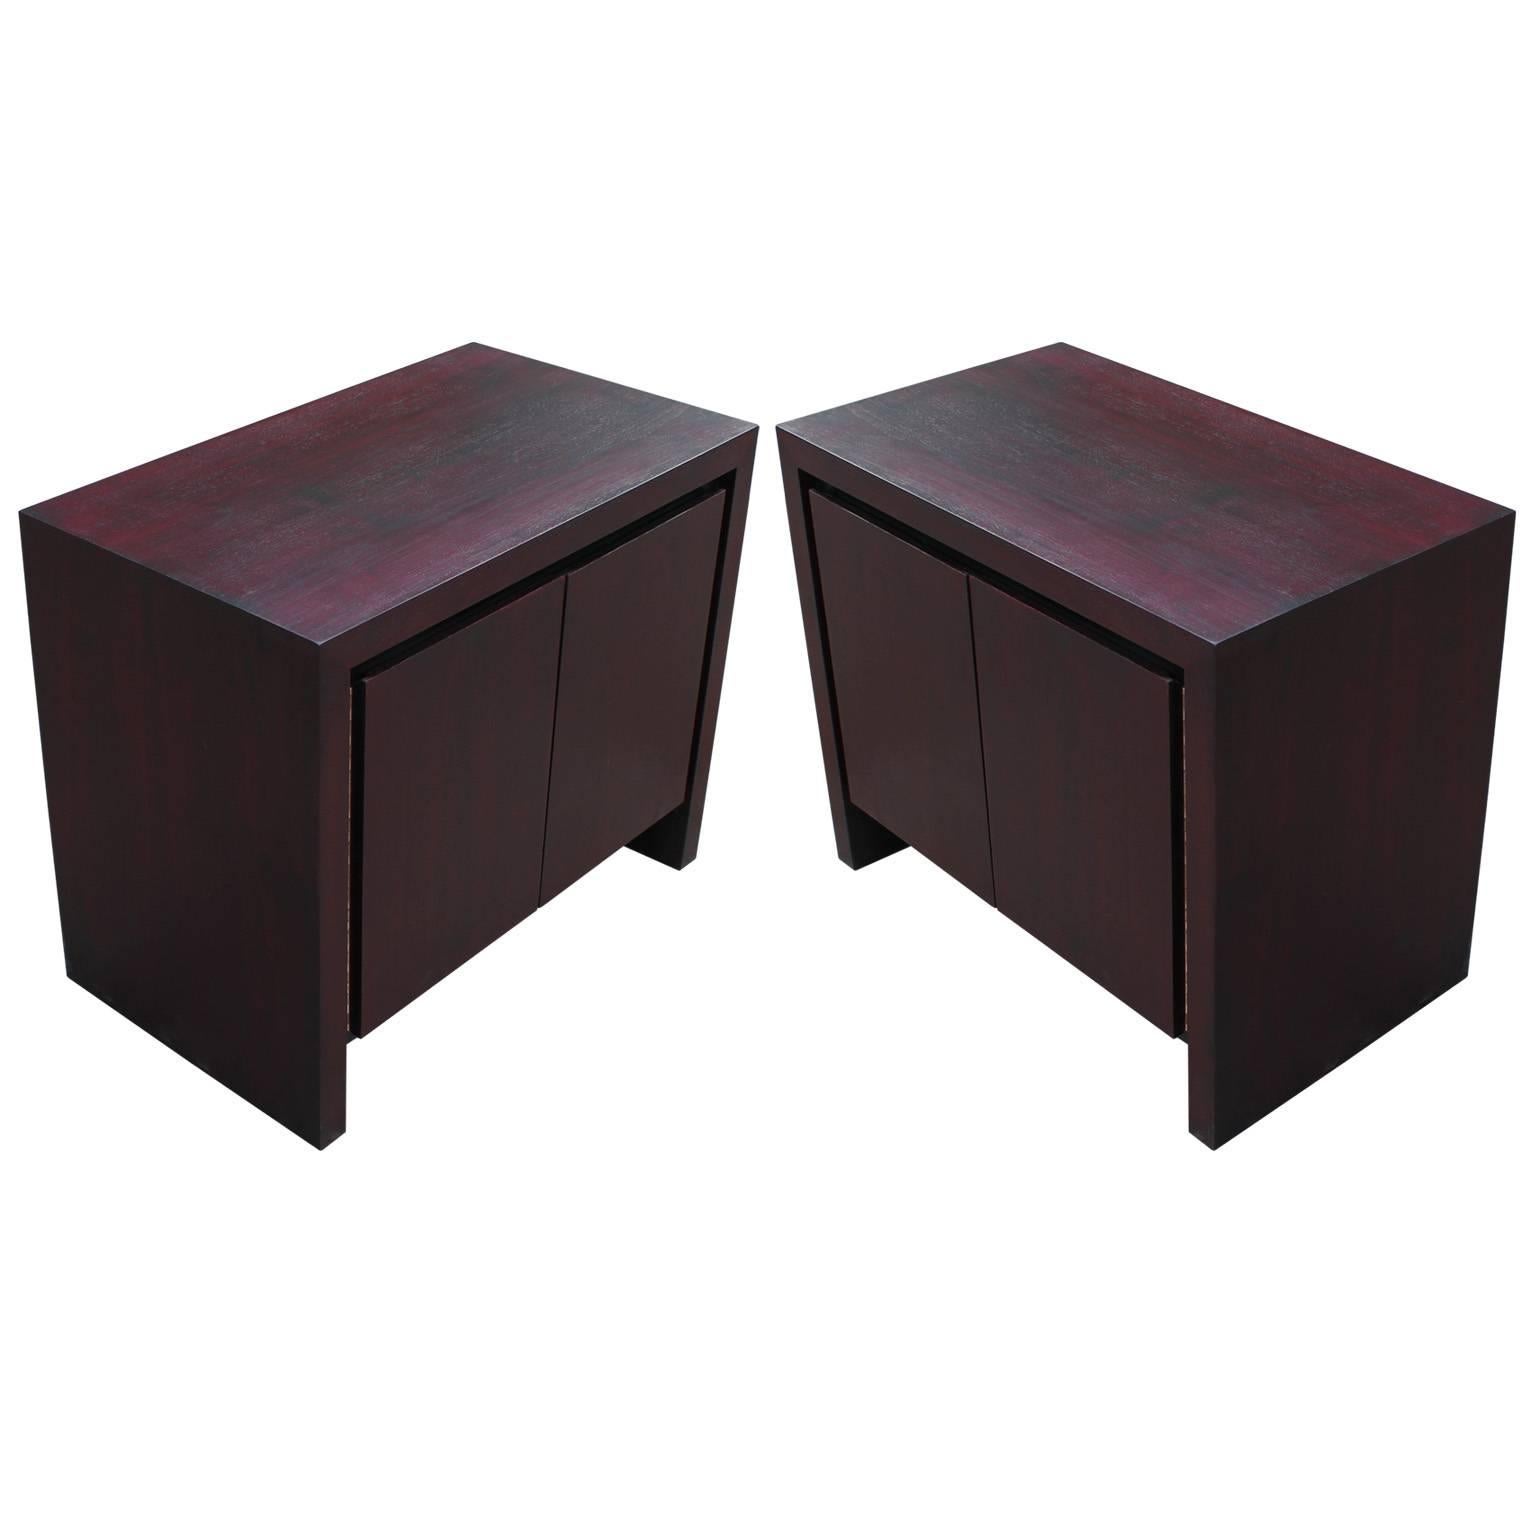 Pair of Clean Lined Modern Vintage Purple Stained Chests / Nightstands